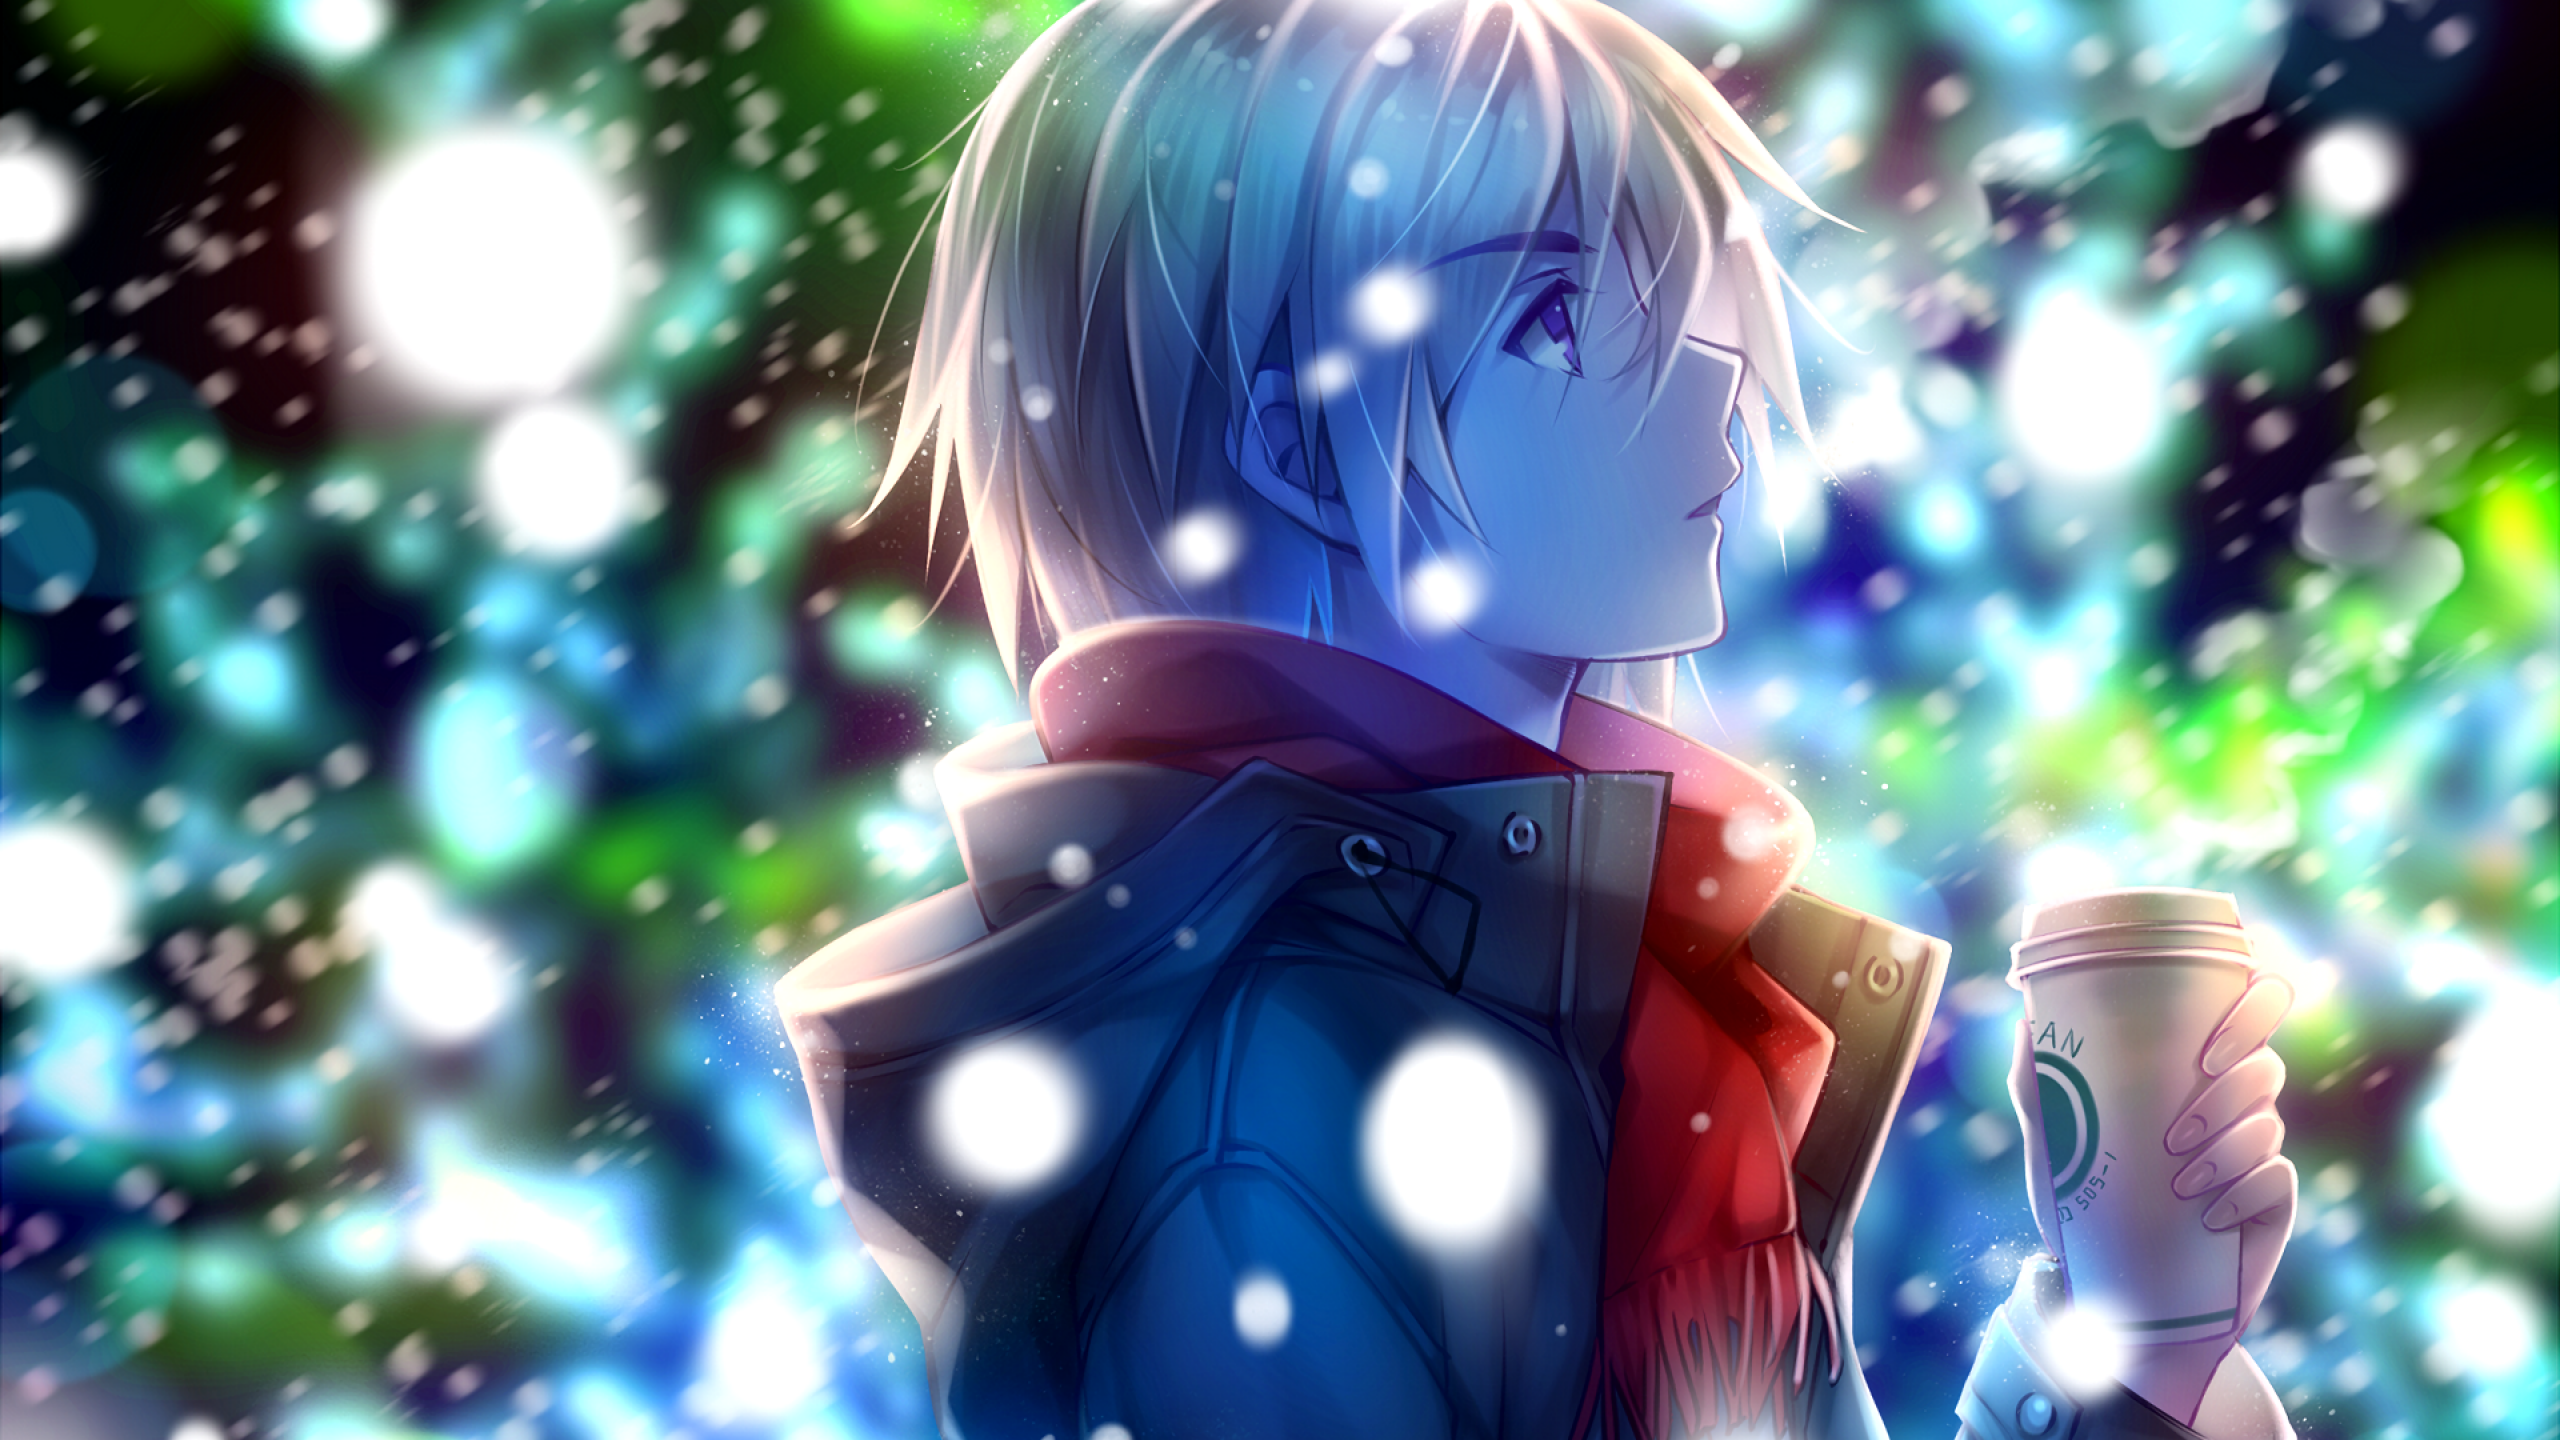 Download 2560x1440 Anime Boy, Profile View, Red Scarf, Winter